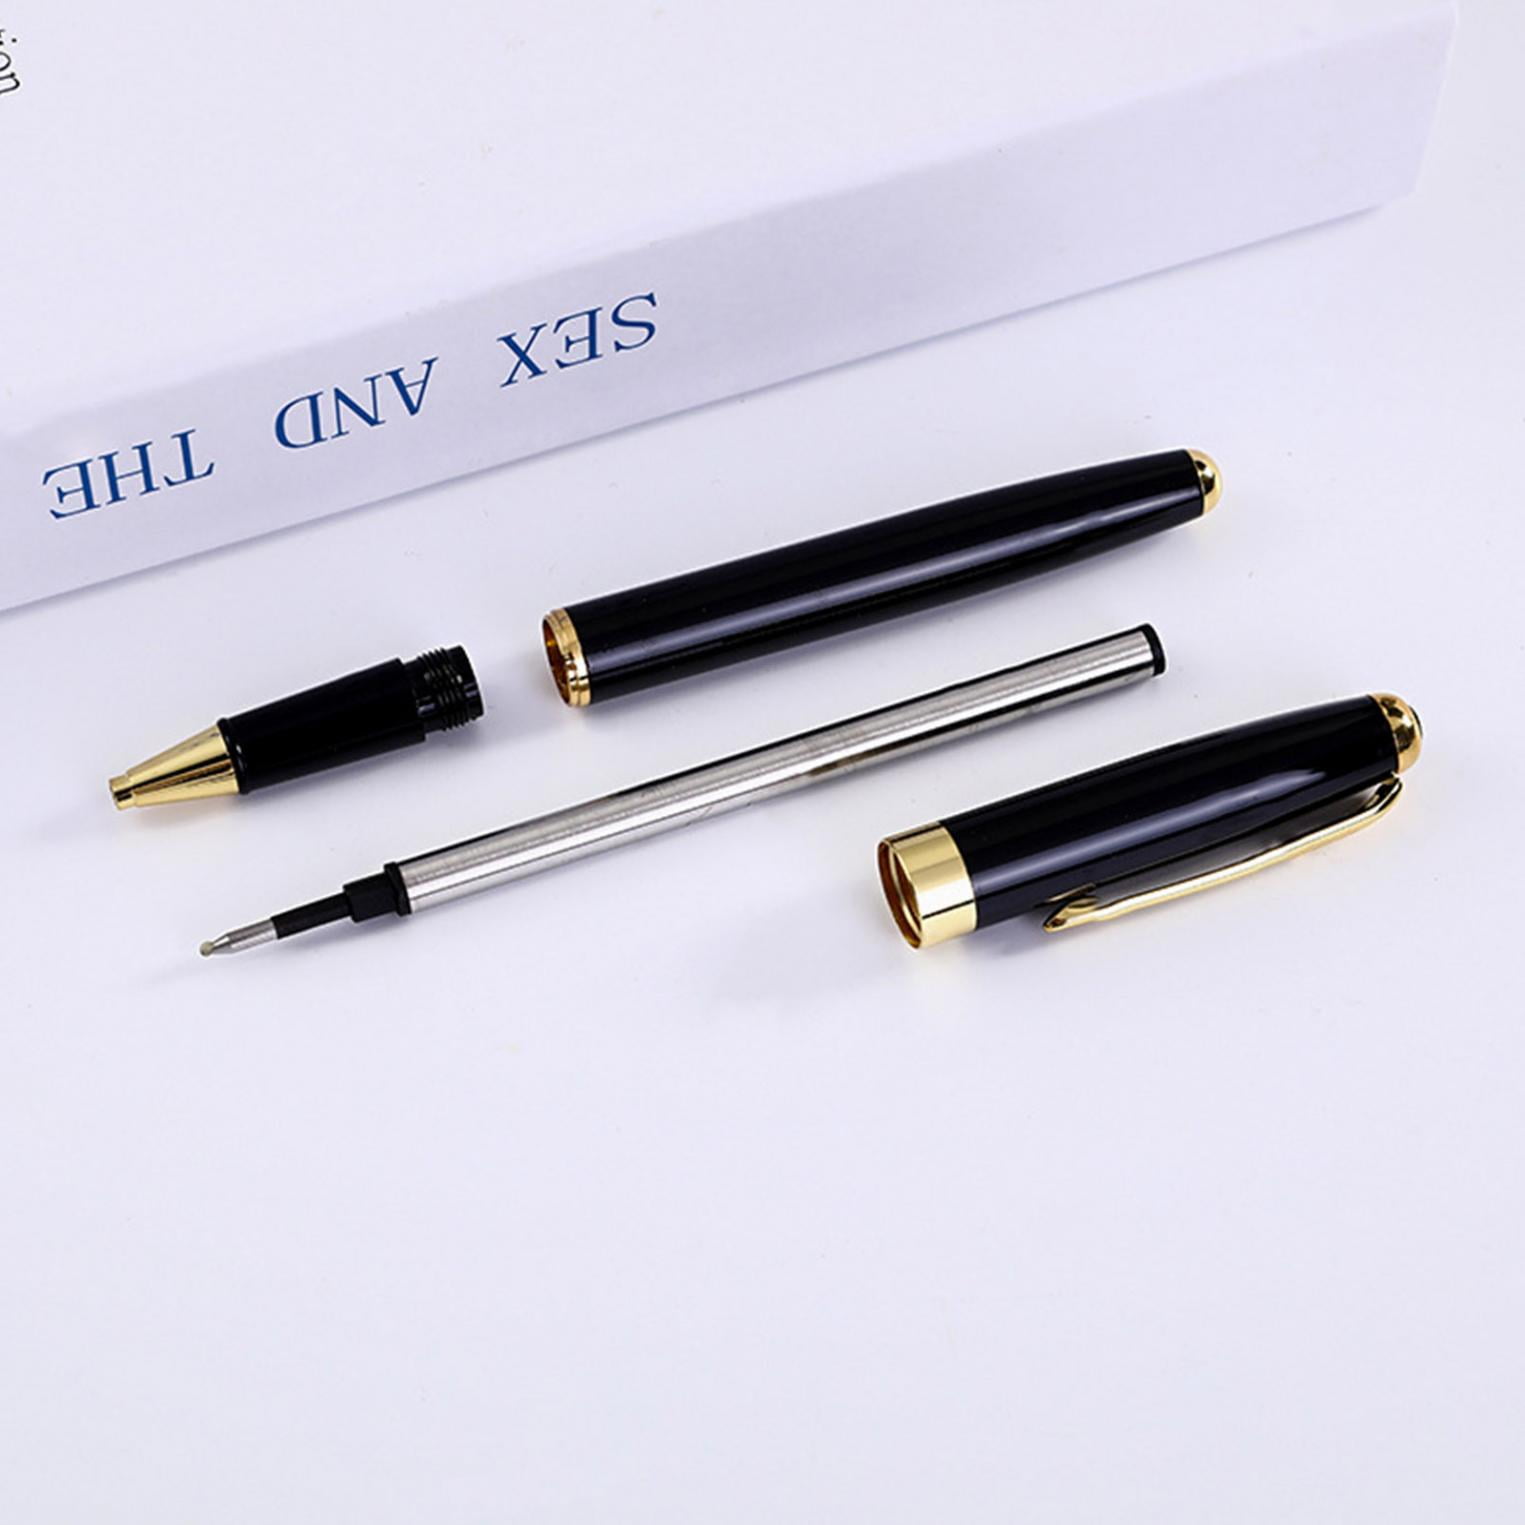  iMeaniy Luxury Ballpoint Pen Writing Set,Elegant Fancy Pens  for Signature Colleague Students Boss,Executive Nice Pens for Business  Birthday with Gift Box,2 extra 0.5 mm refill(2 pens) : Office Products